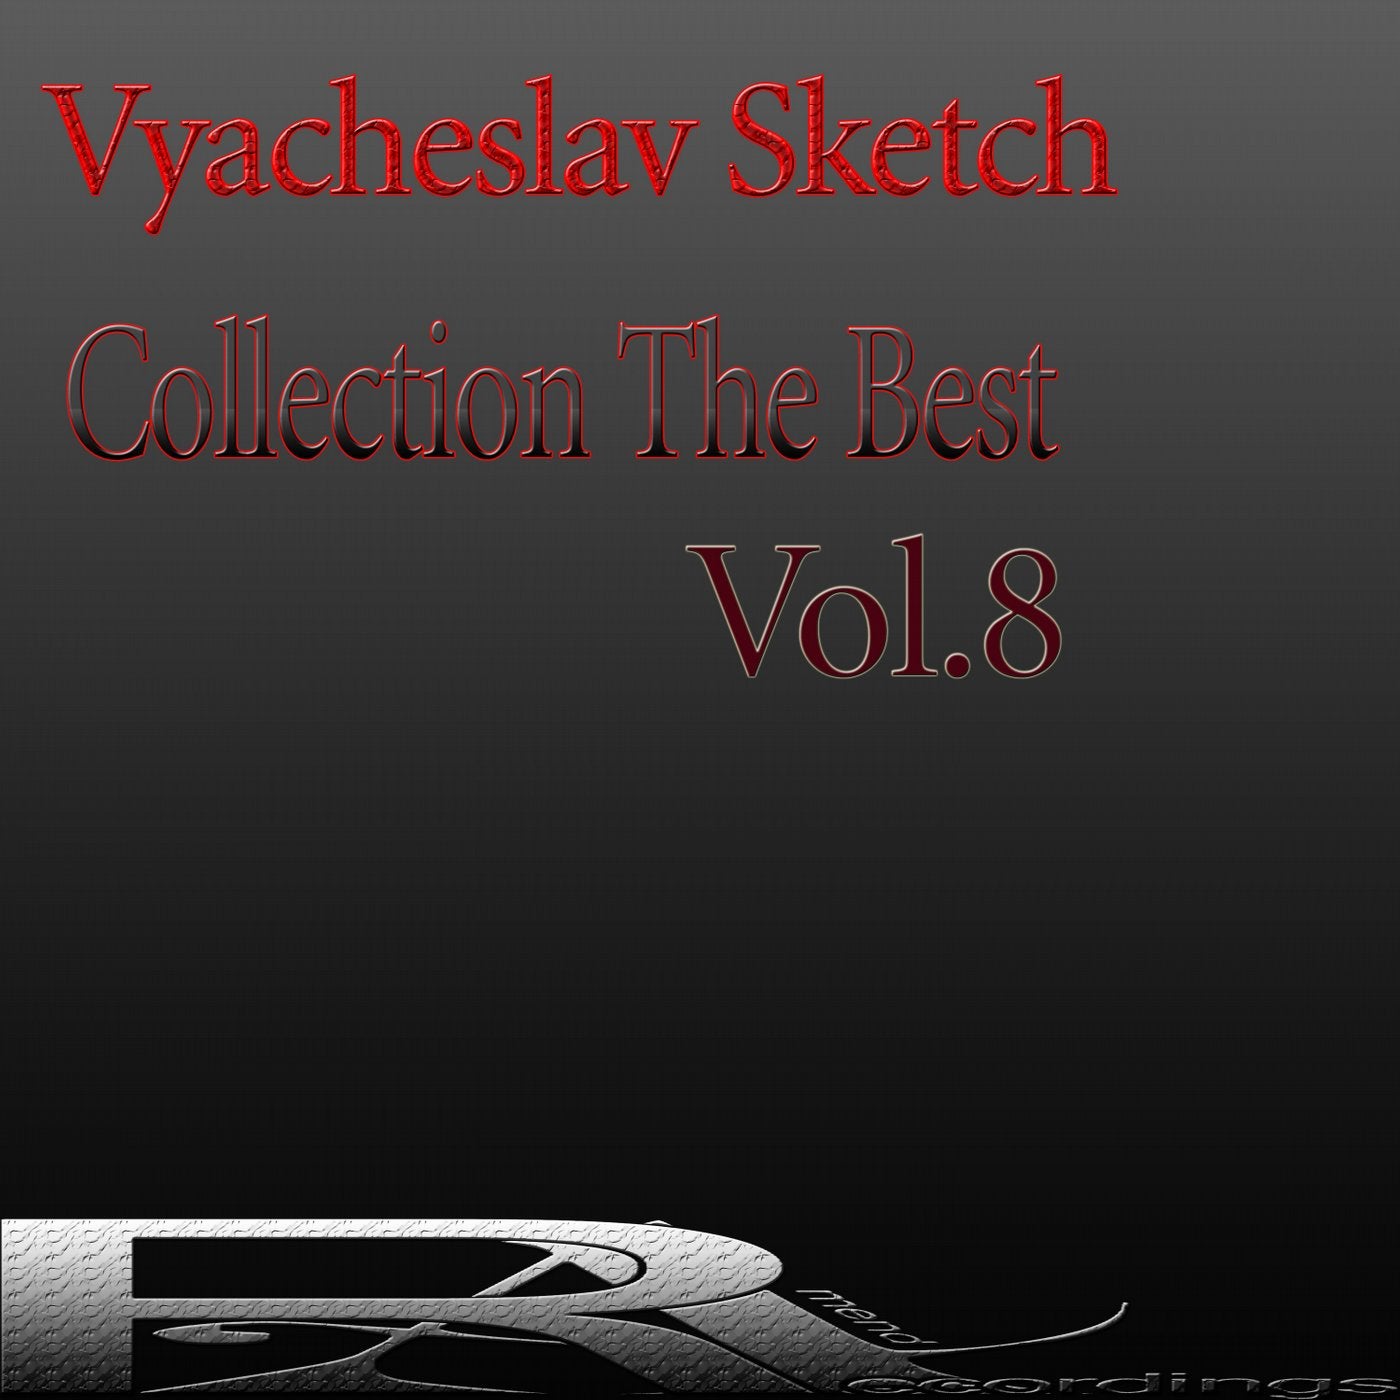 Collection The Best, Vol.8